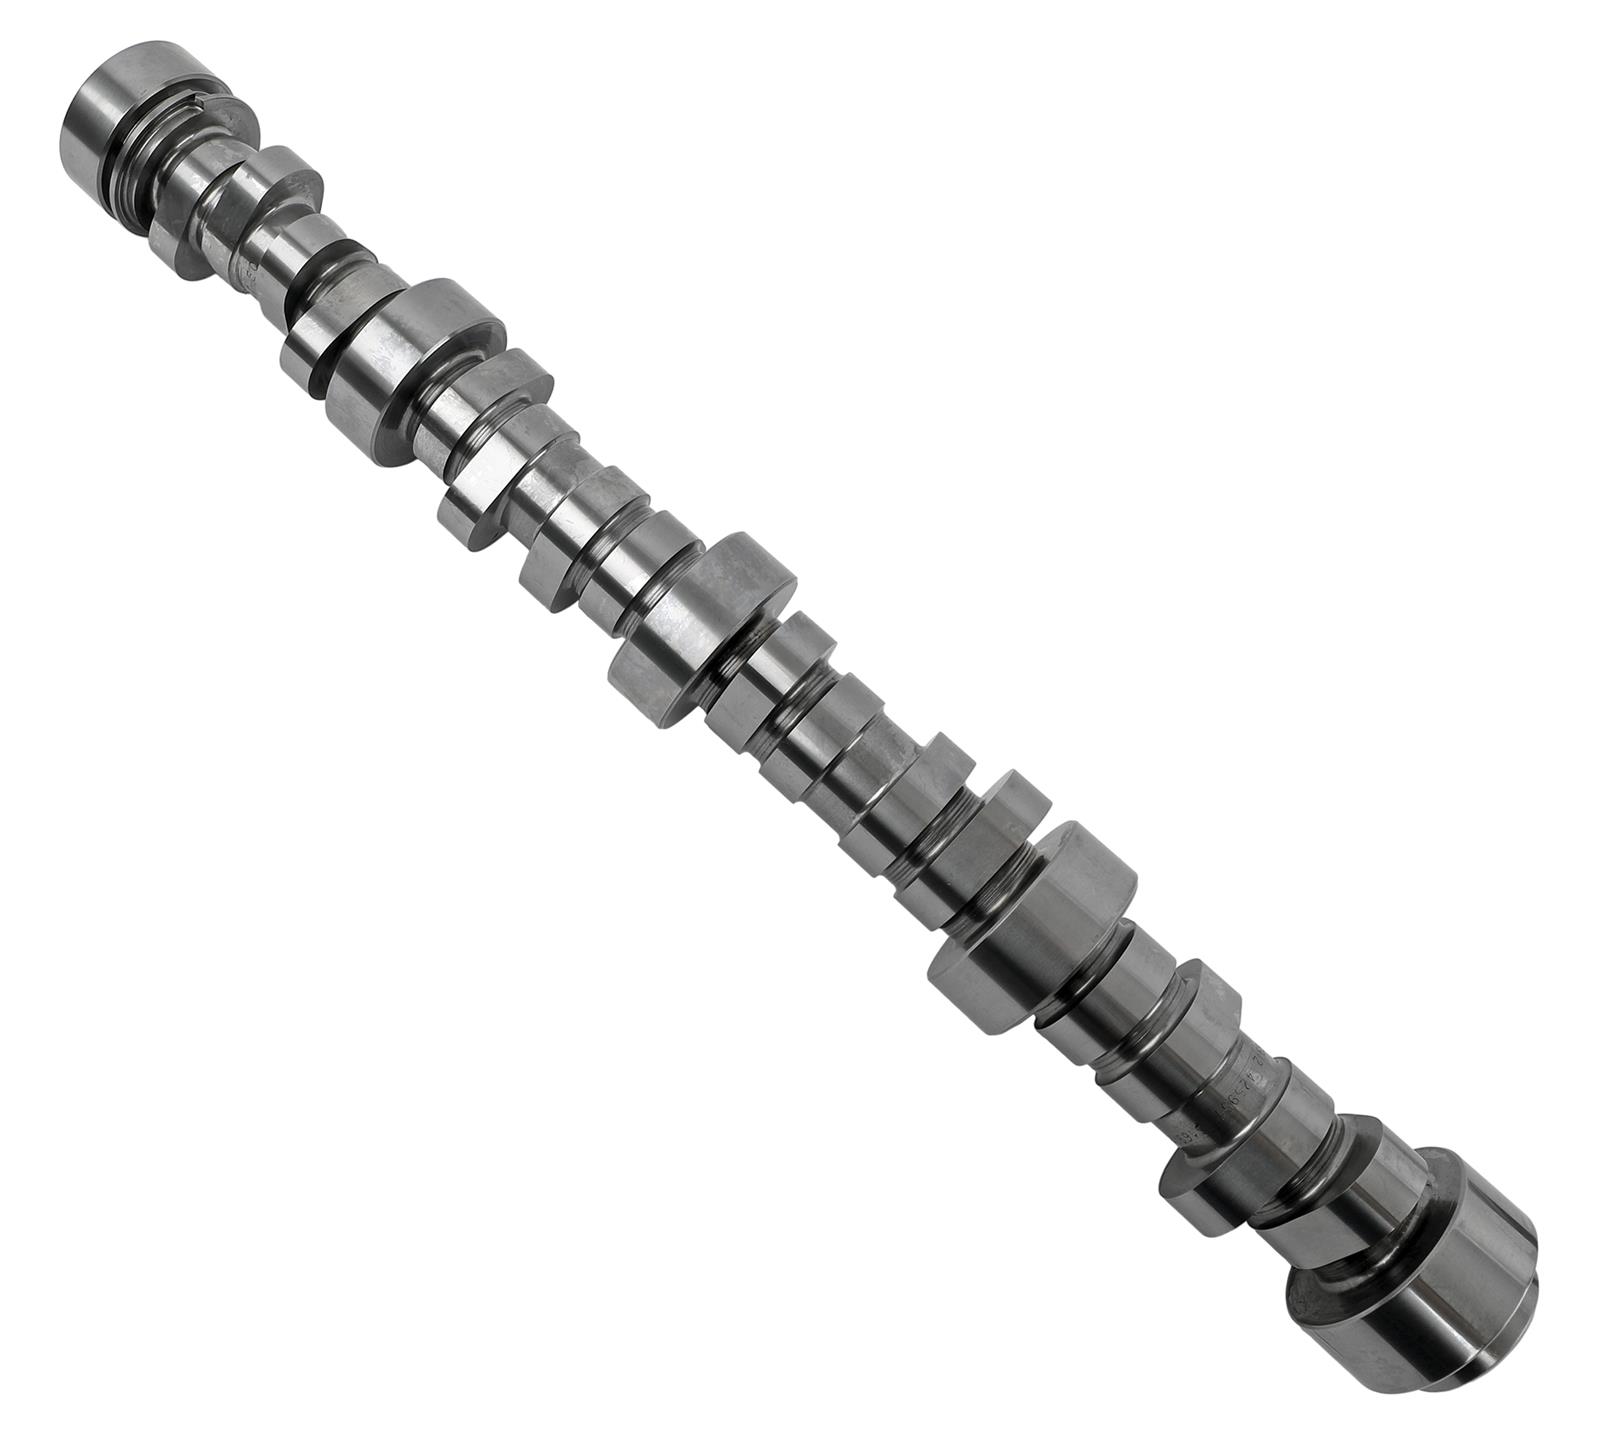 COMP Cams 54-459-11 COMP Cams LSR Series Hydraulic Roller Camshafts |  Summit Racing